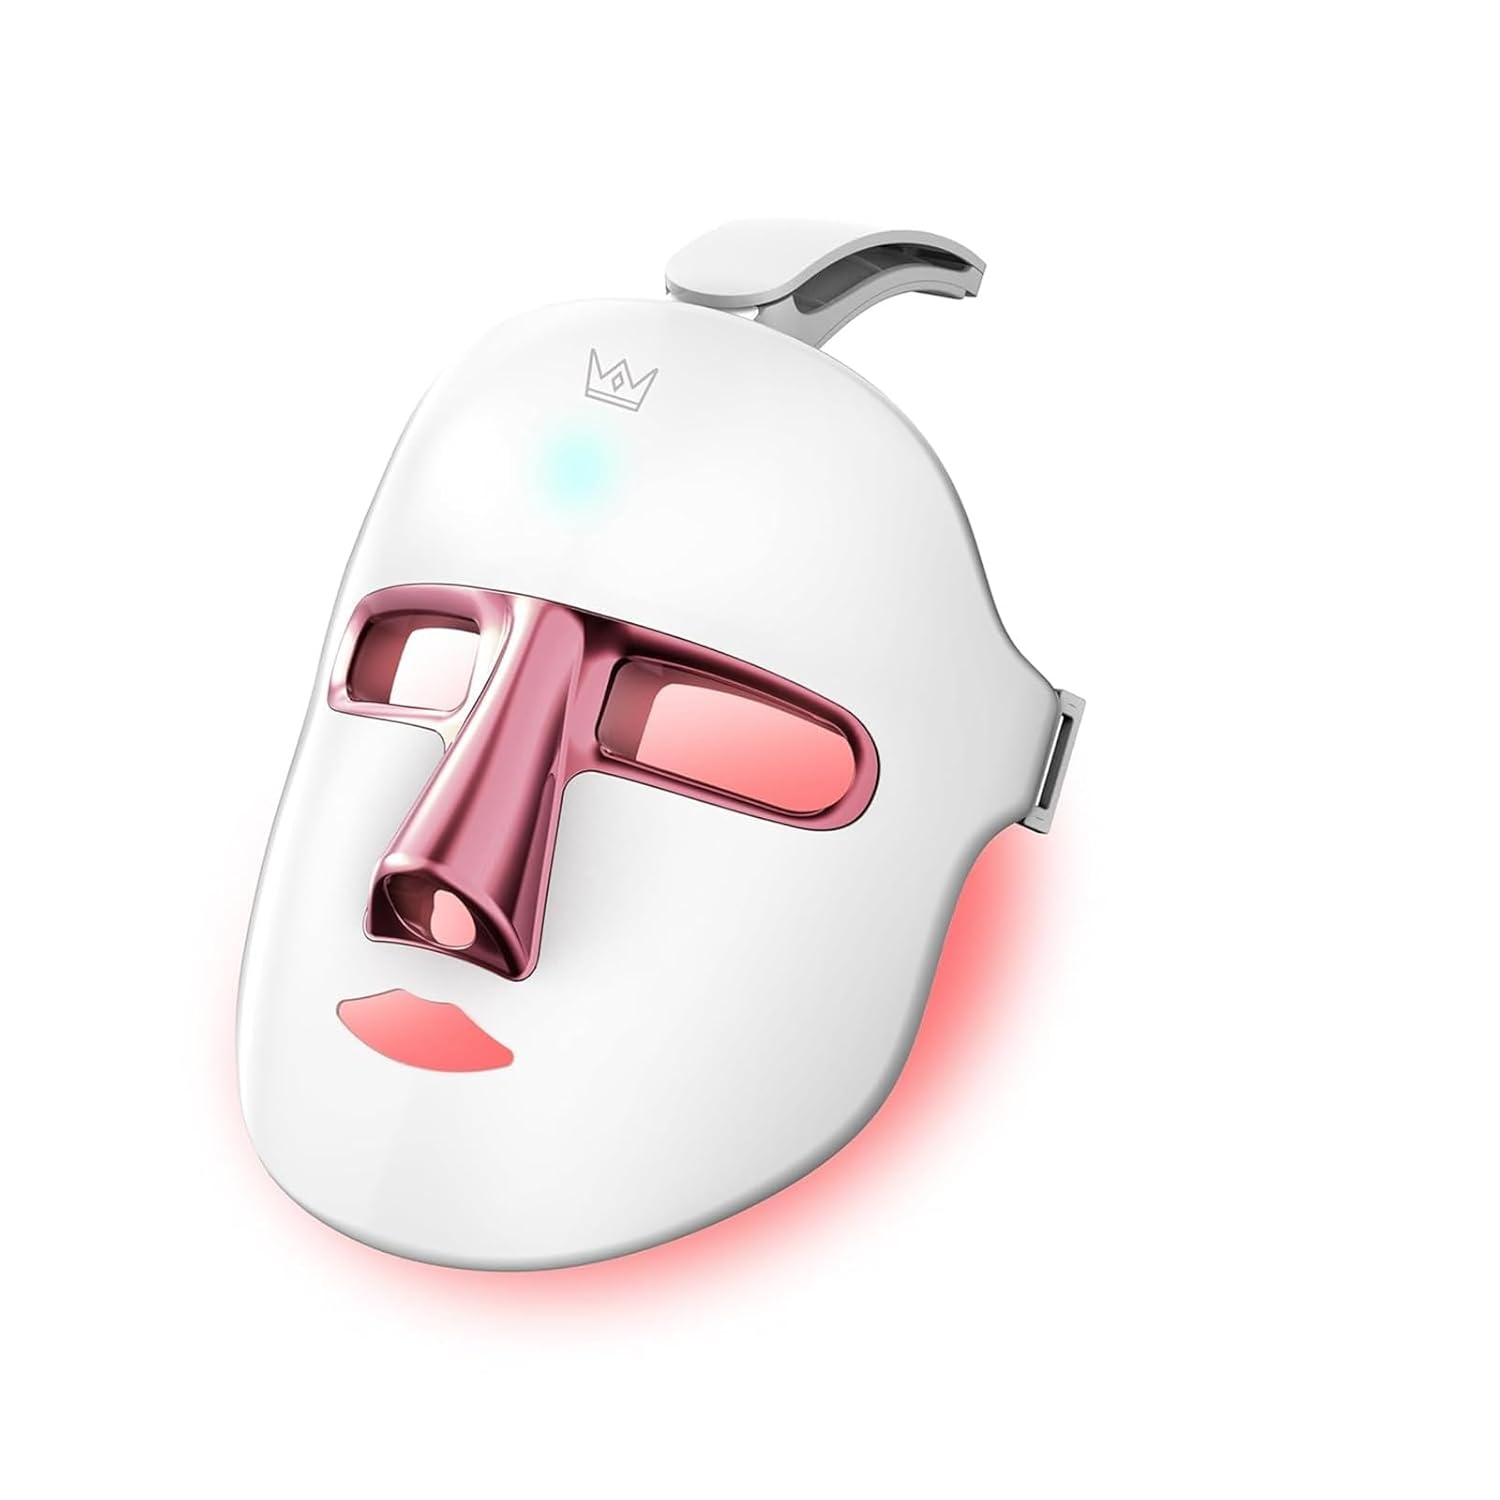 a white mask with a pink nose and a blue light